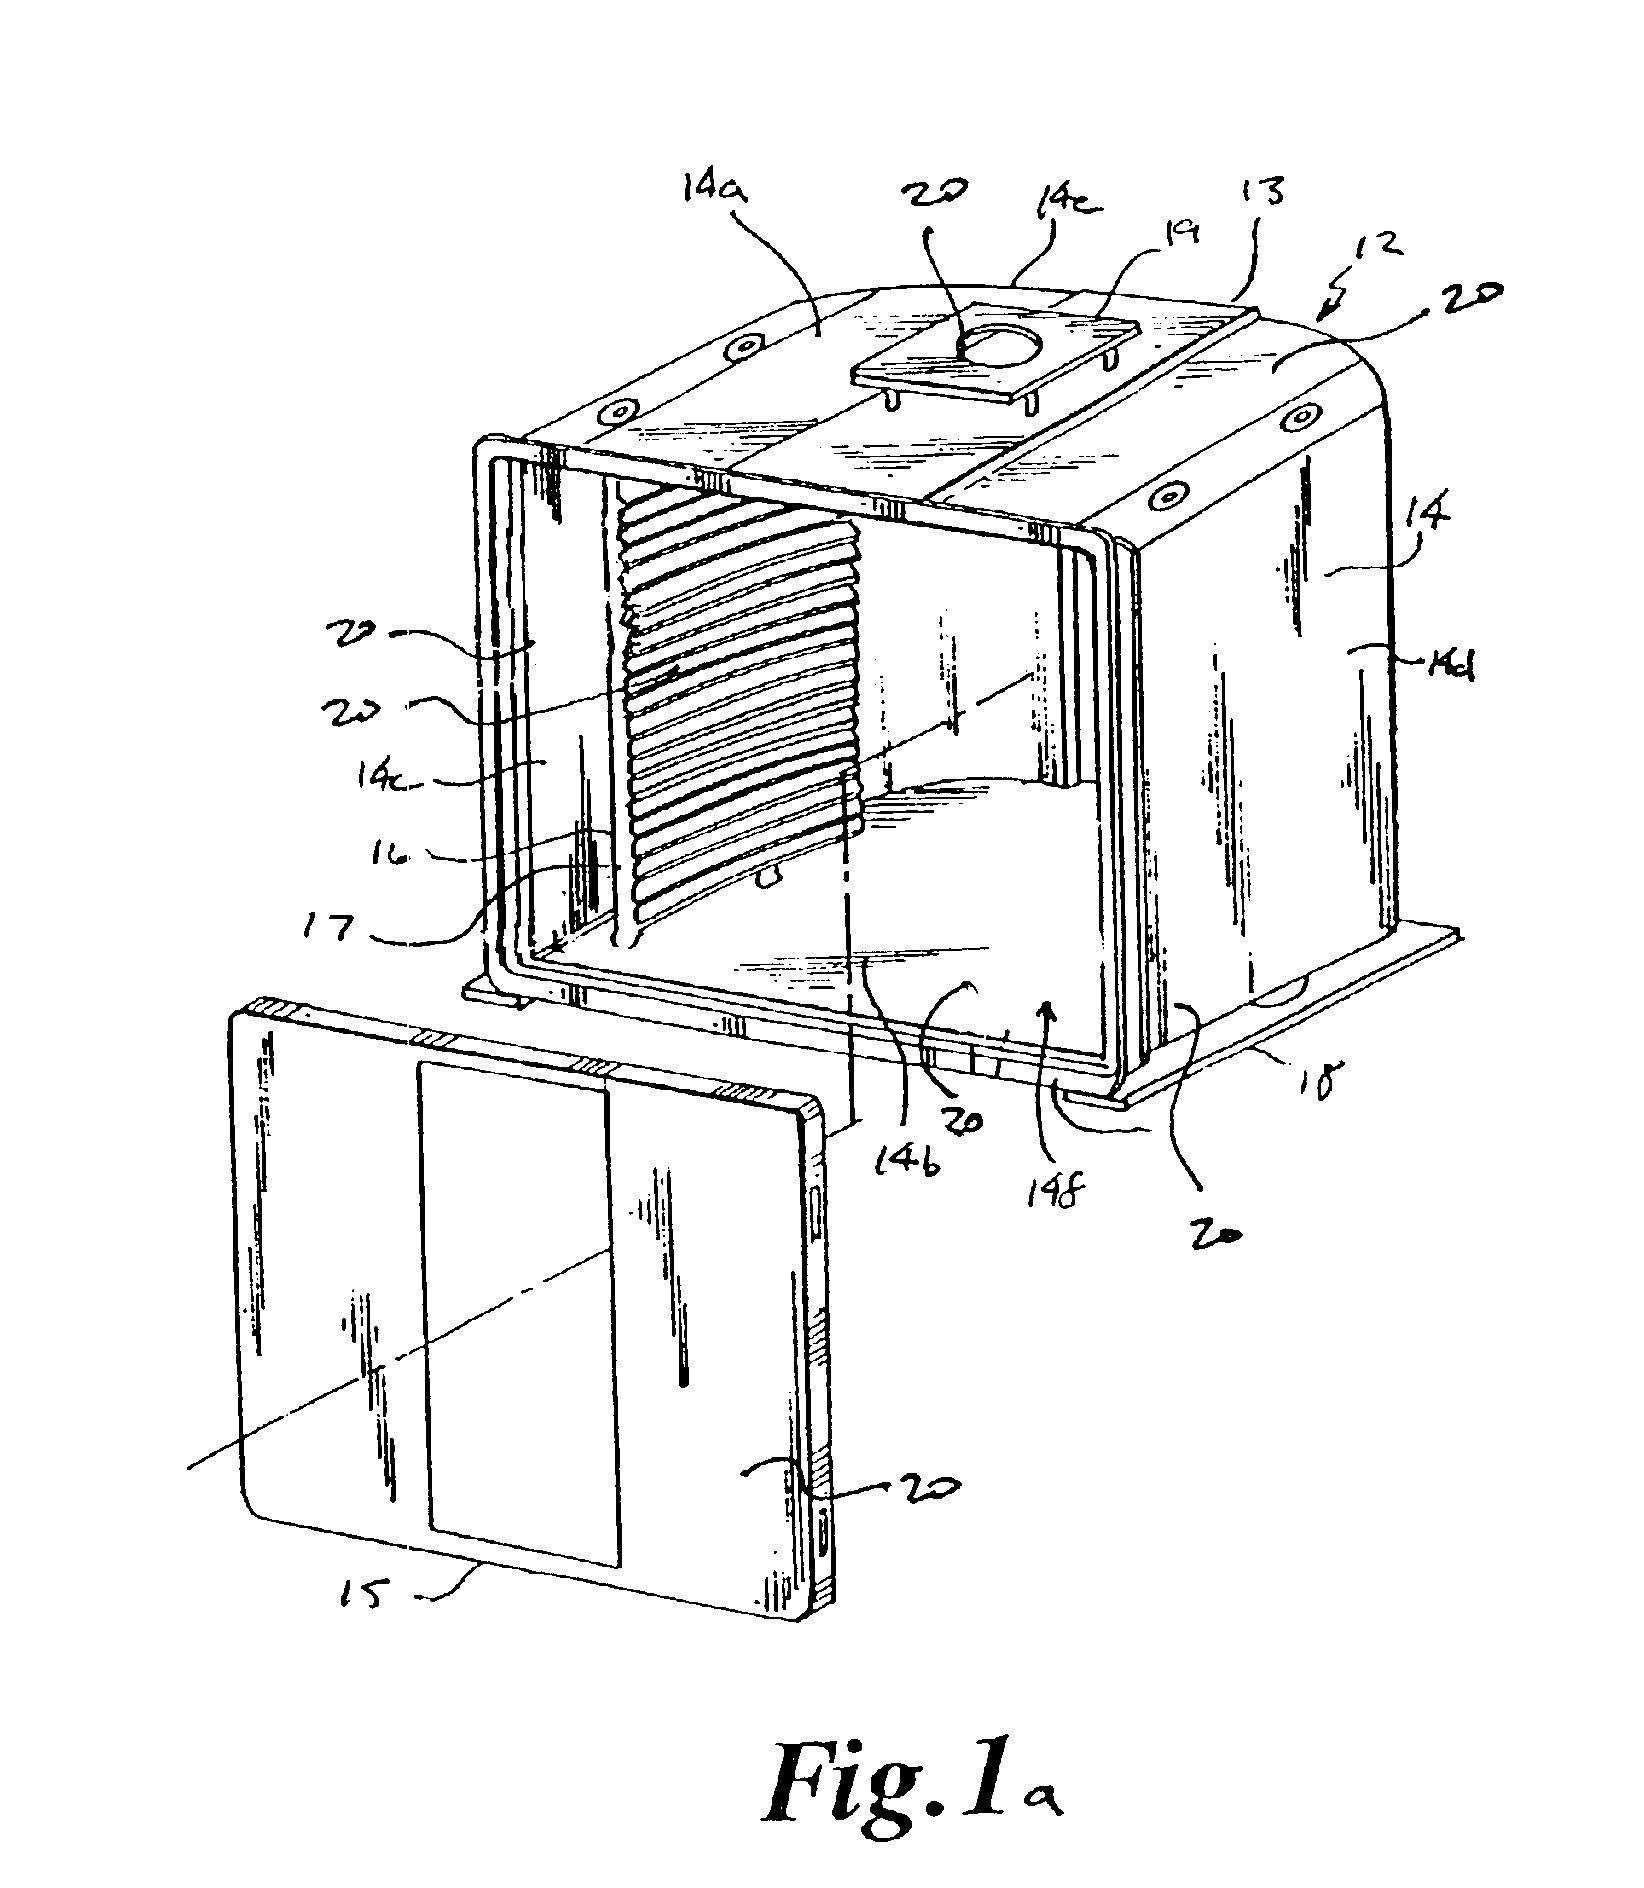 Wafer carrier with ultraphobic surfaces